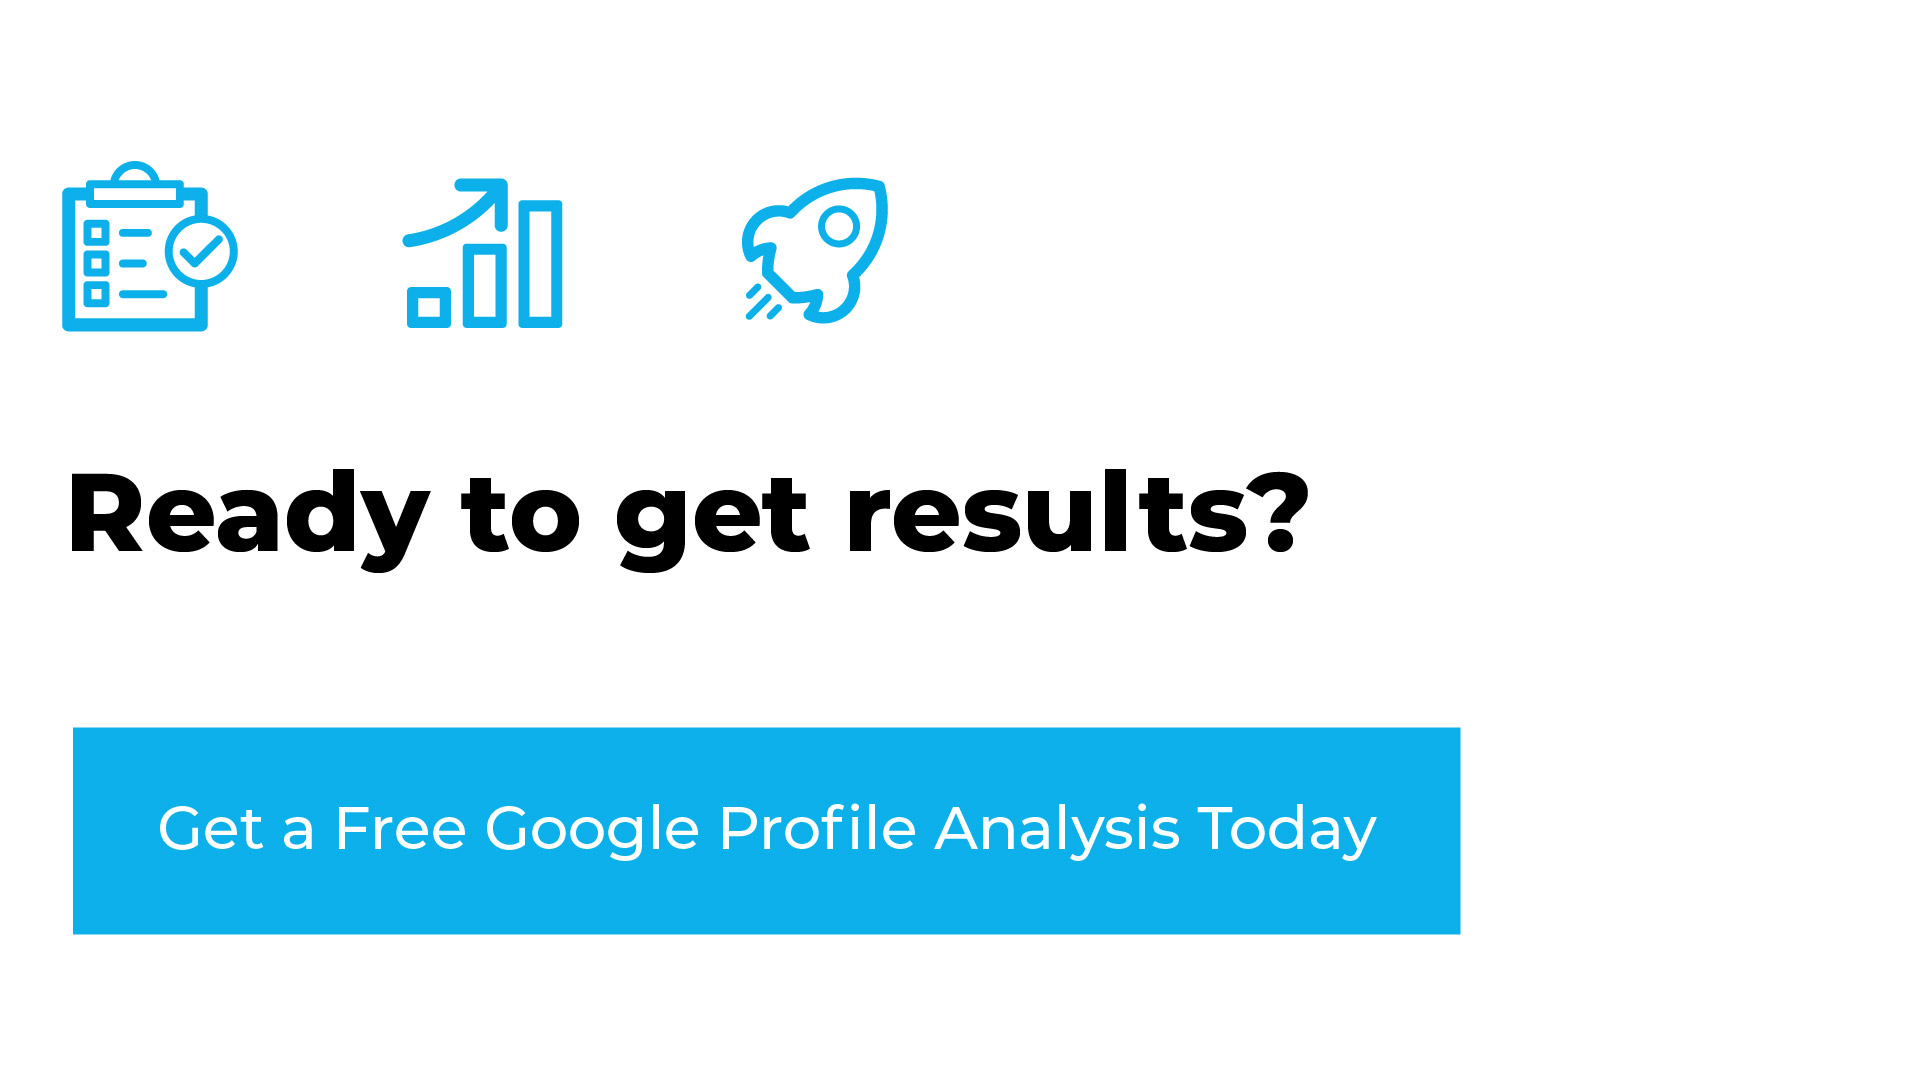 Ready to Get Results? Claim your Free Google Business Profile Analysis Today